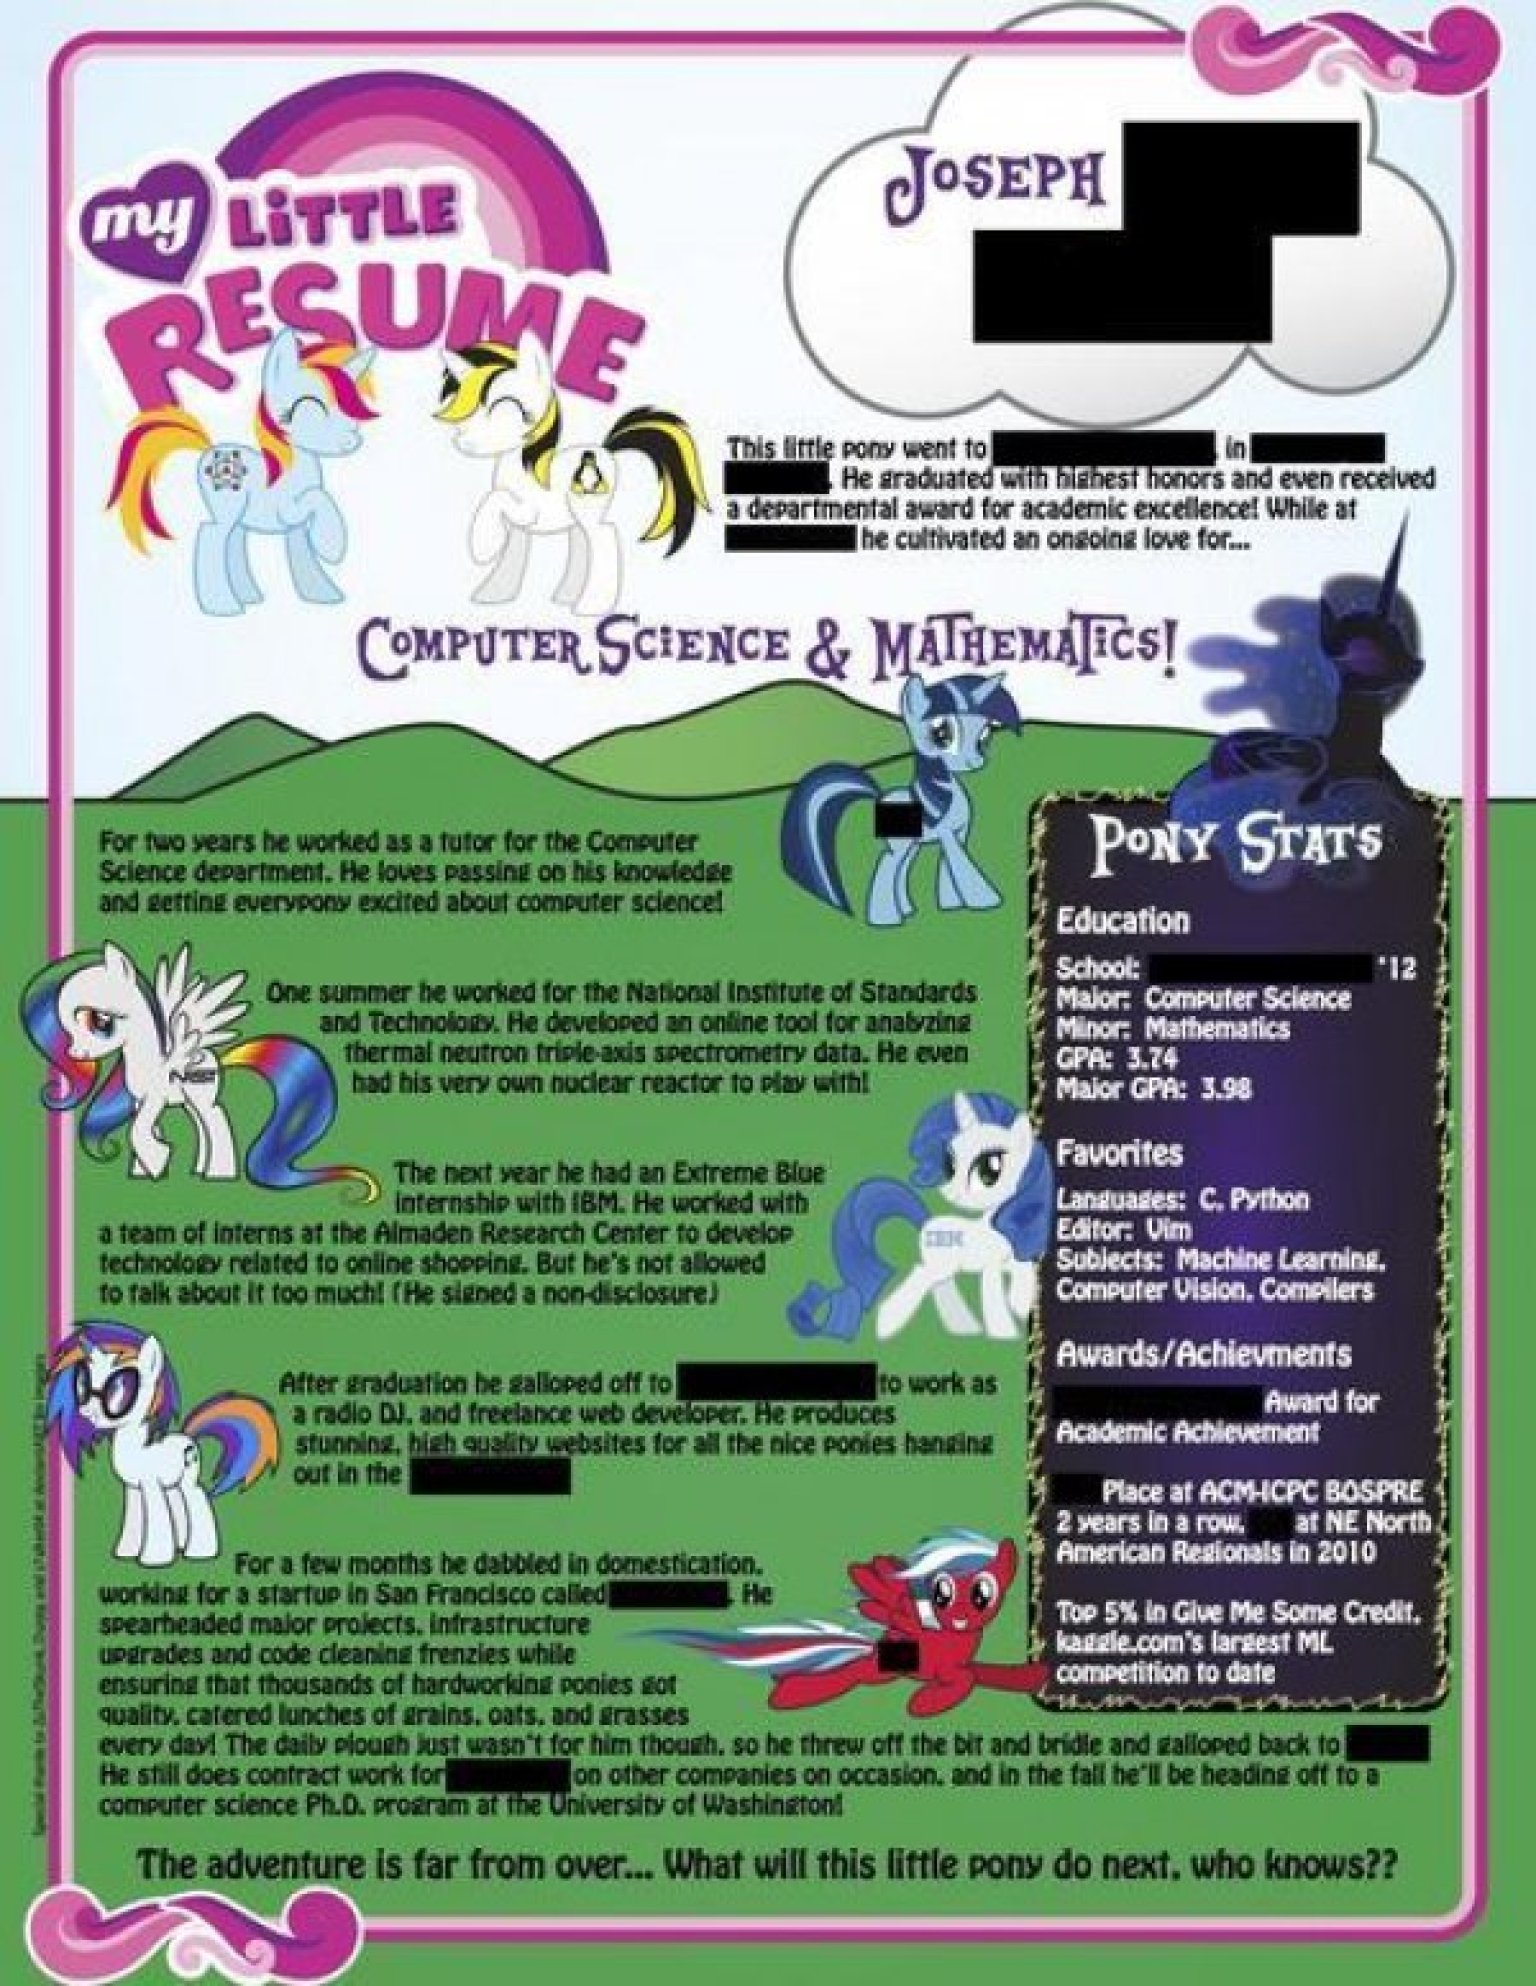 my little pony resume belongs to either the least or most employable person ever  photo